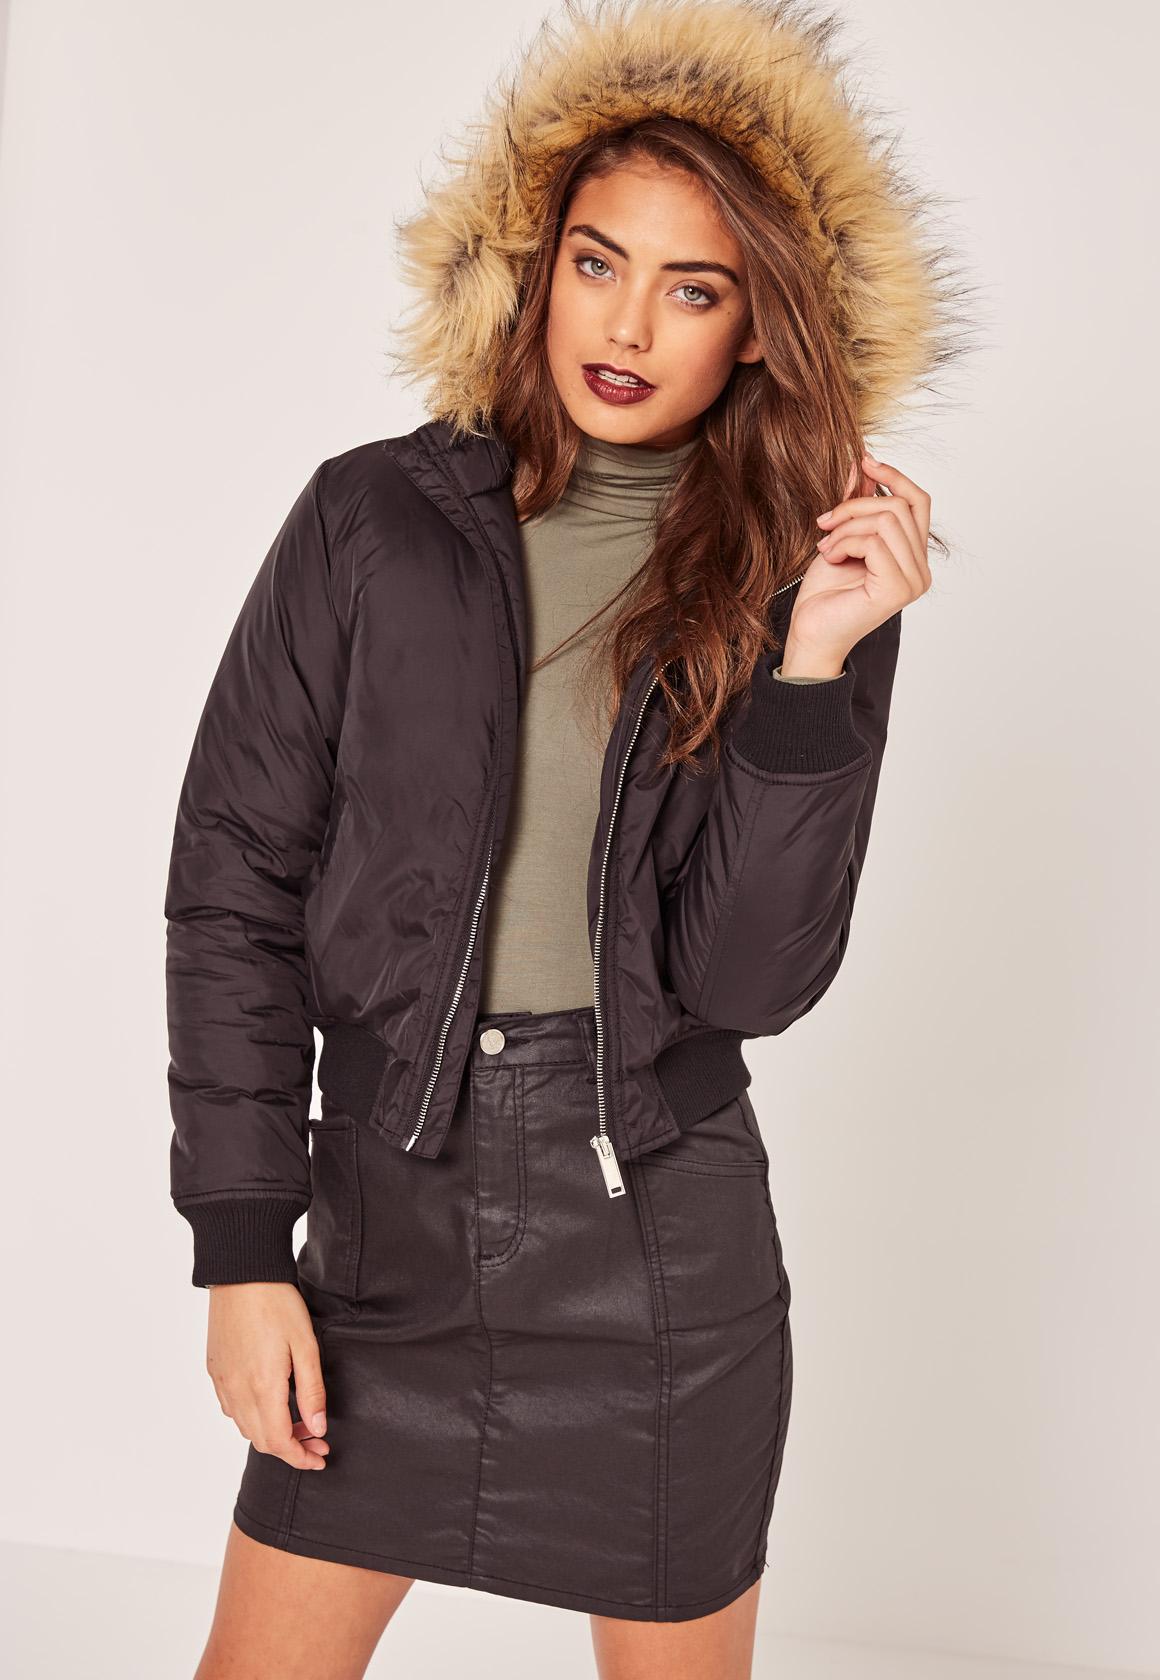 Black Winter Coat with Fur Hood – Gives You the Best Stylish Look | Fit